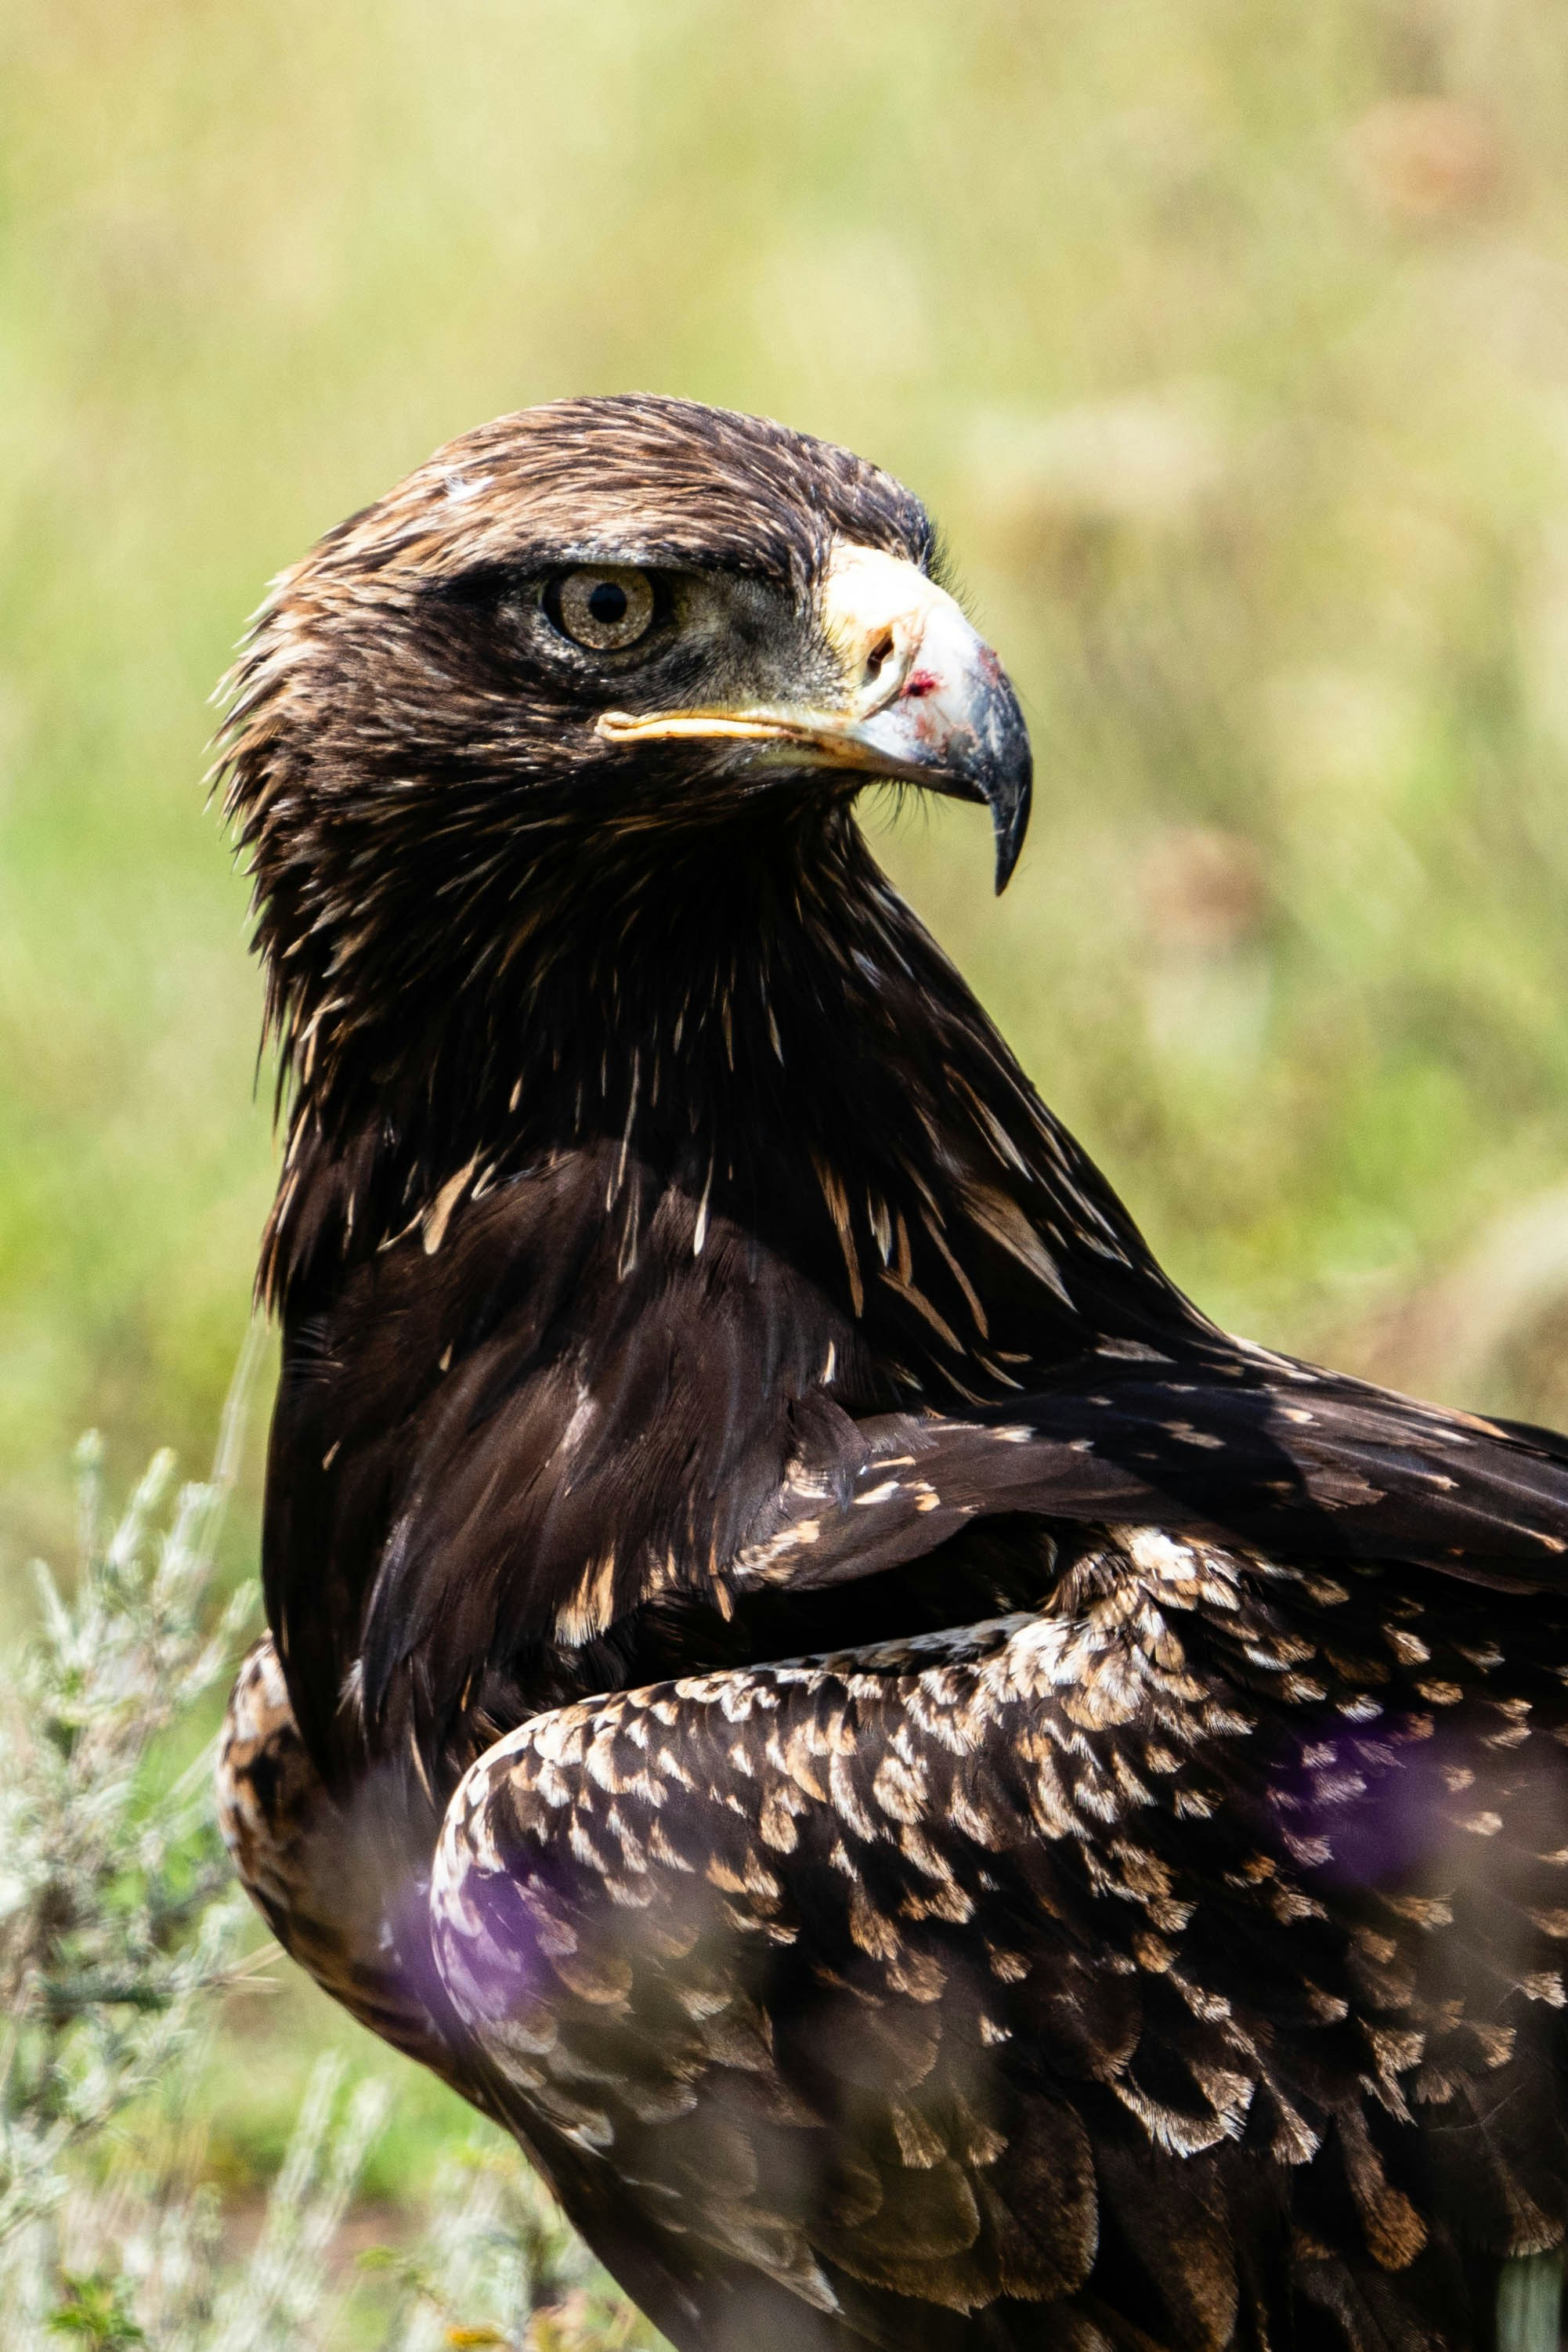 great photo recipe,how to photograph golden african eagle.